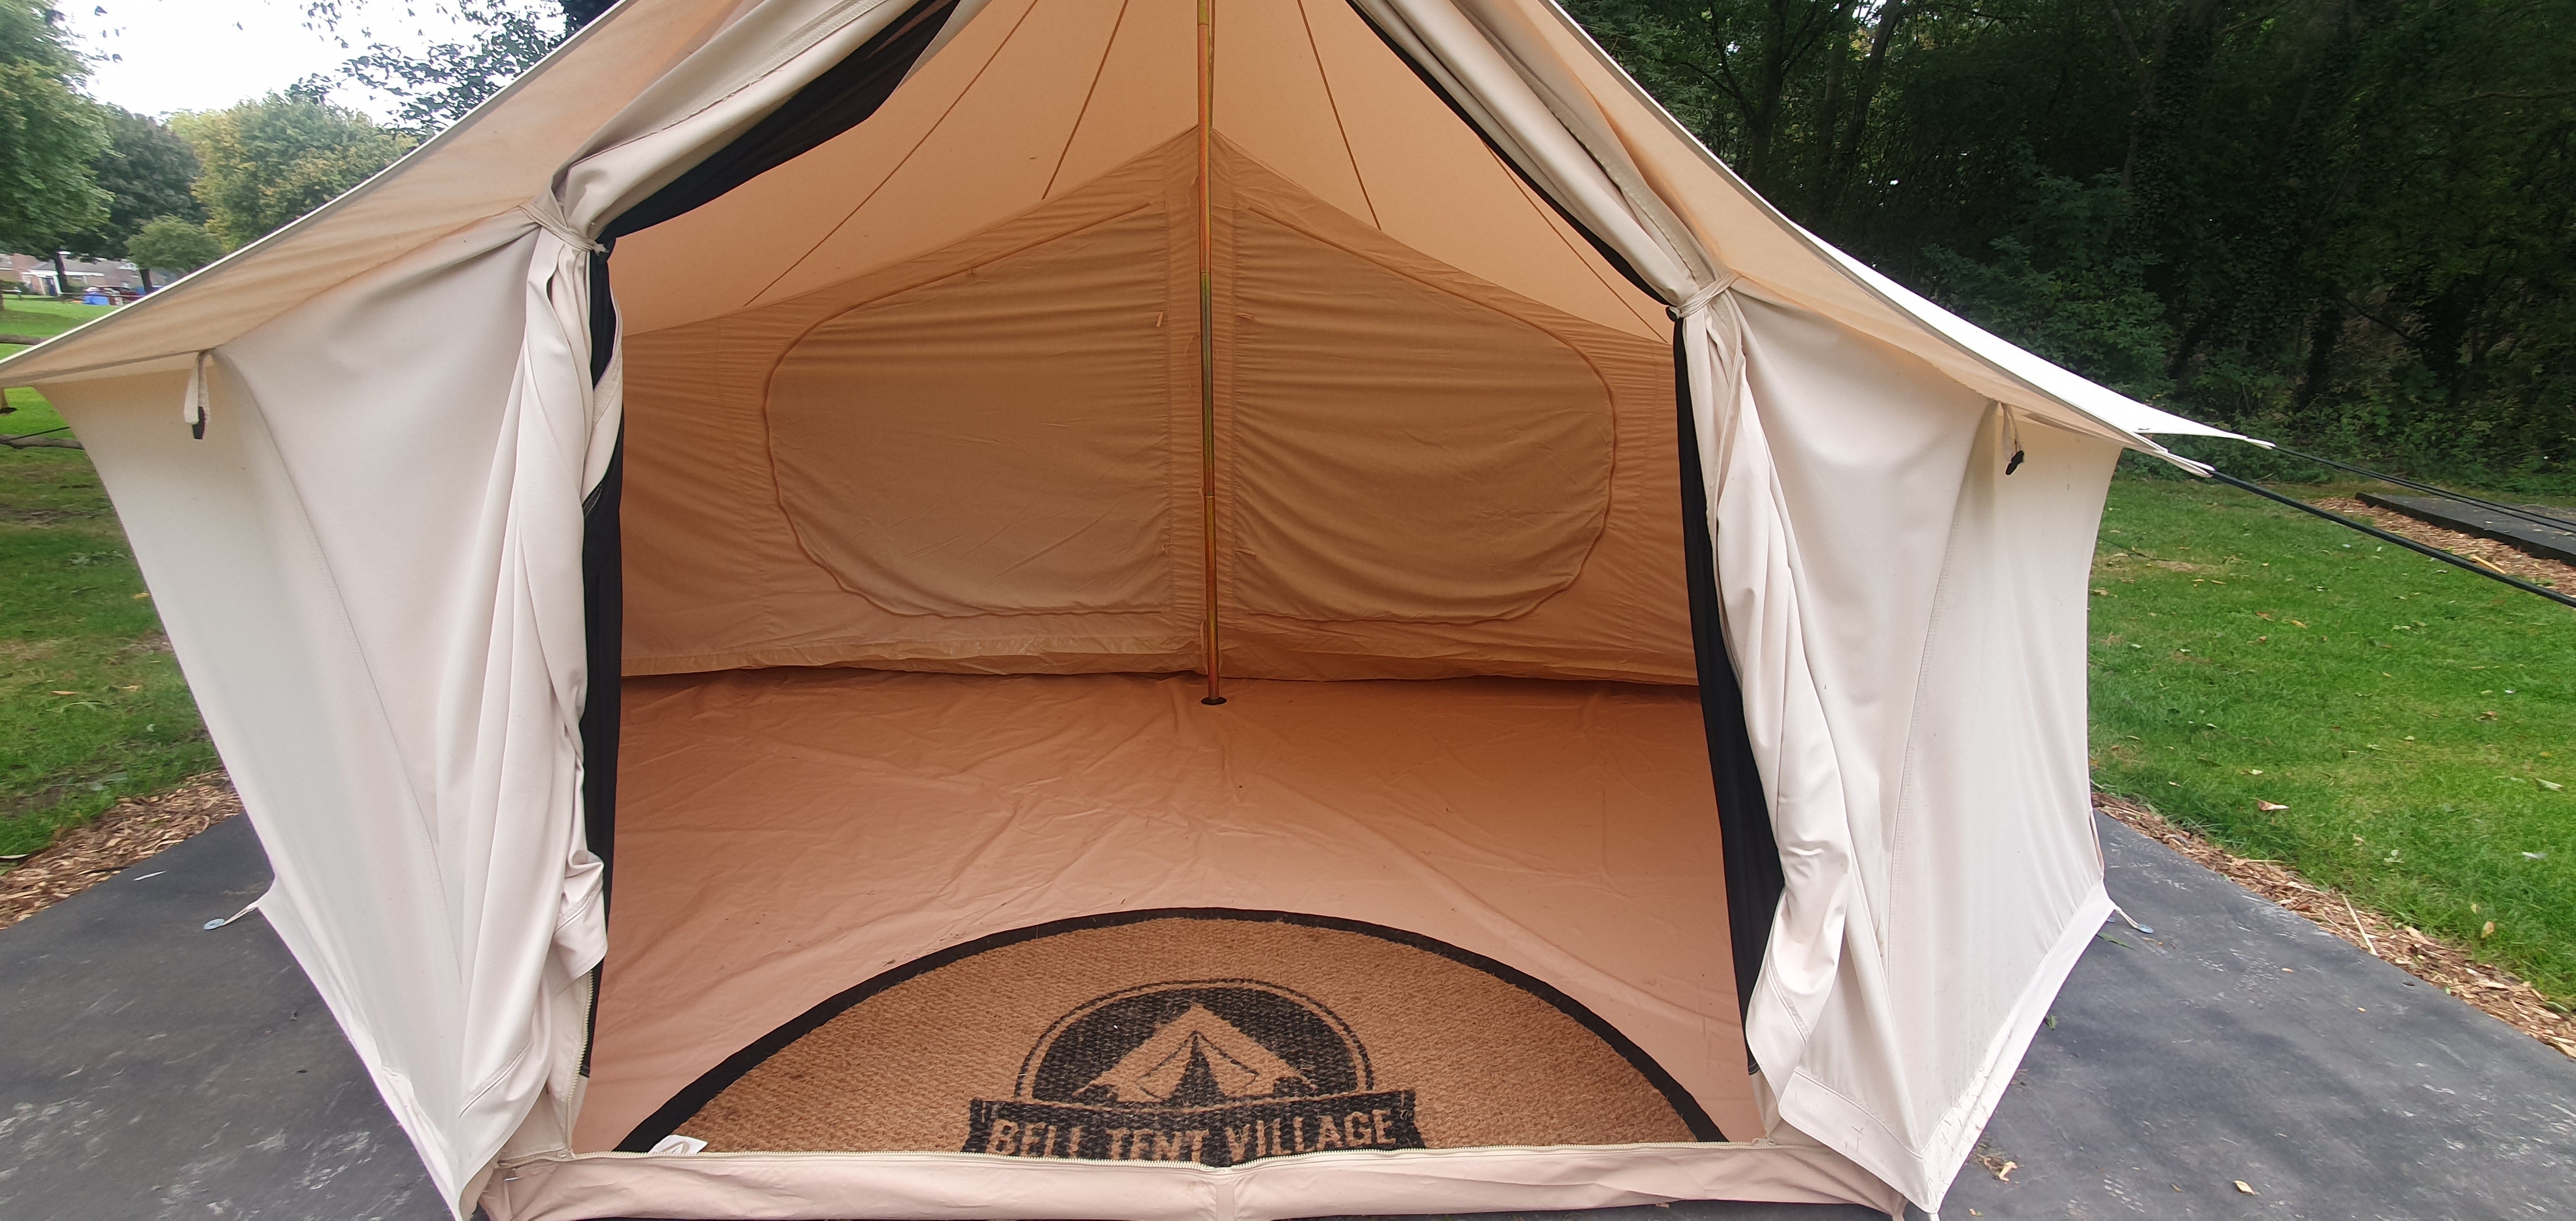 BTV 4 - XL (1.2m High Walls) Water Resistant & Fire Retardant Cotton Canvas Bell Tent With Stove Hole (Single Door)